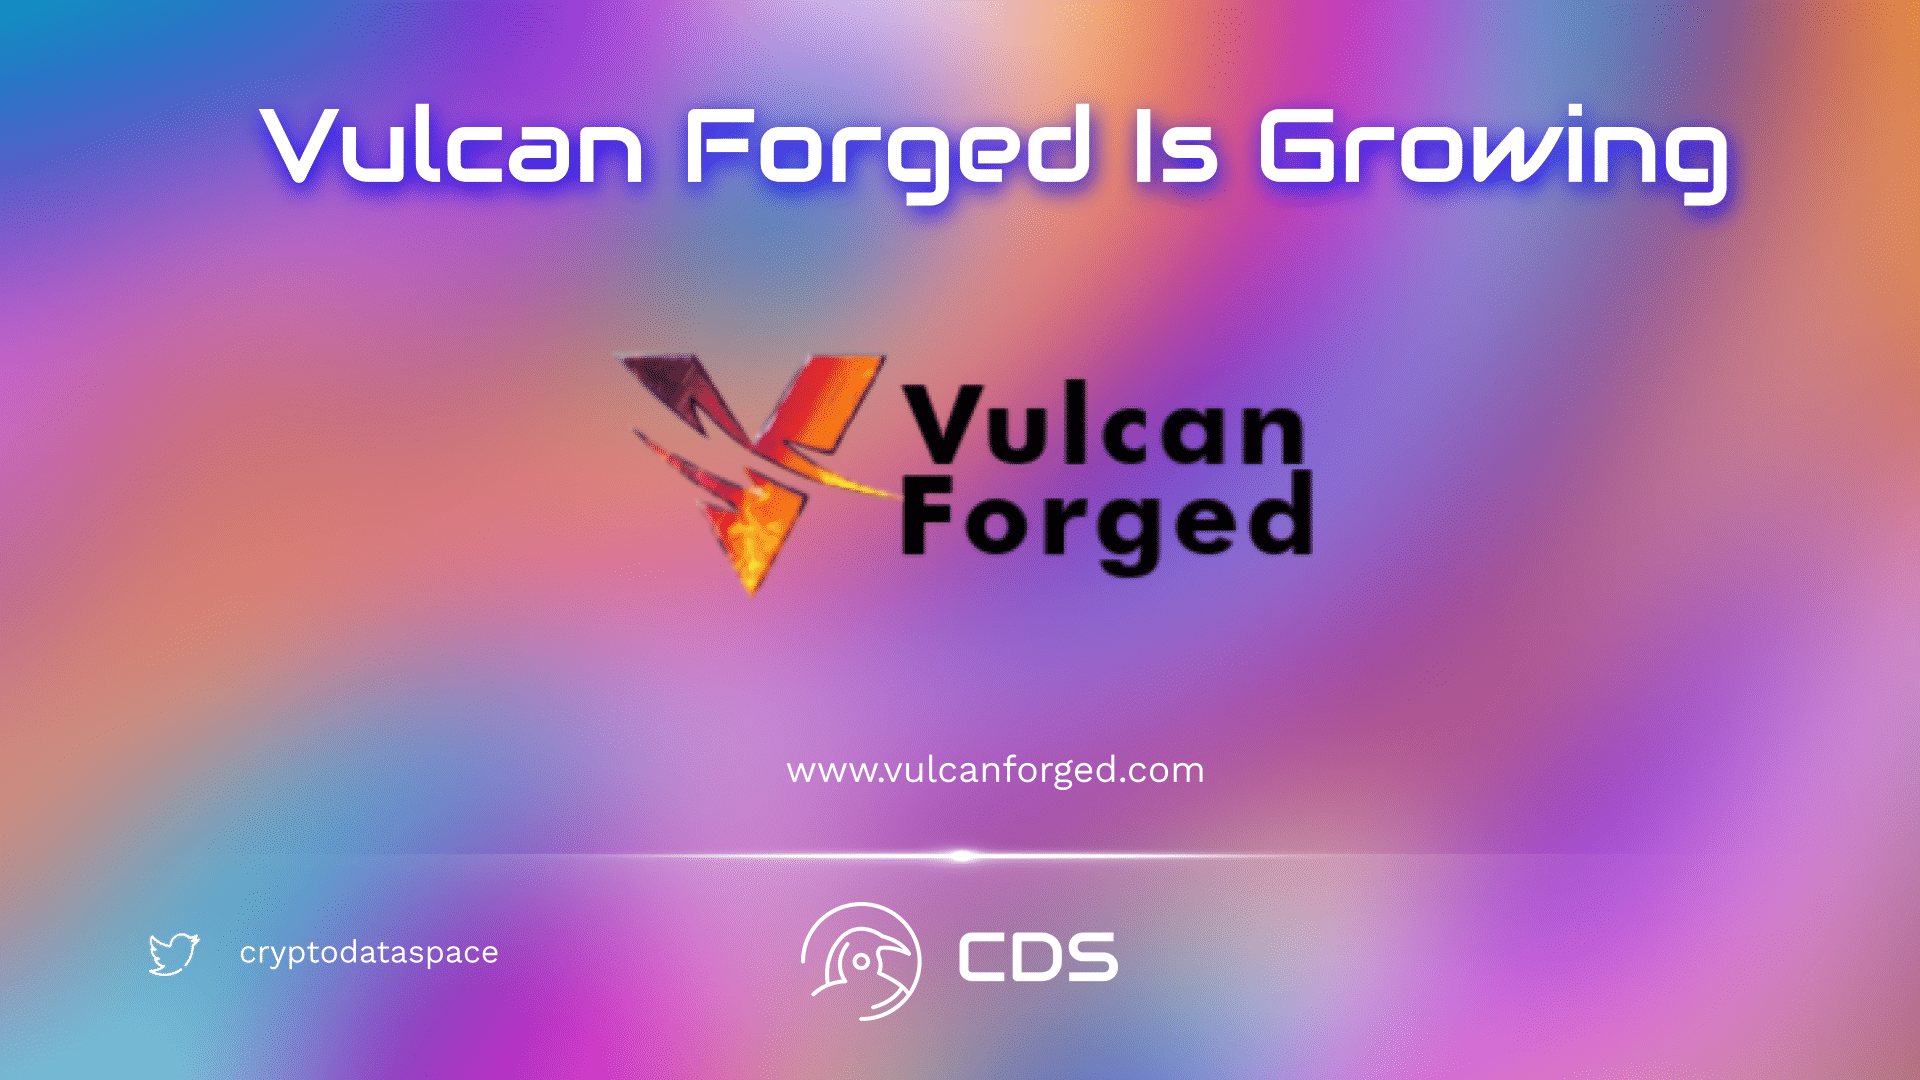 Vulcan Forged Is Growing